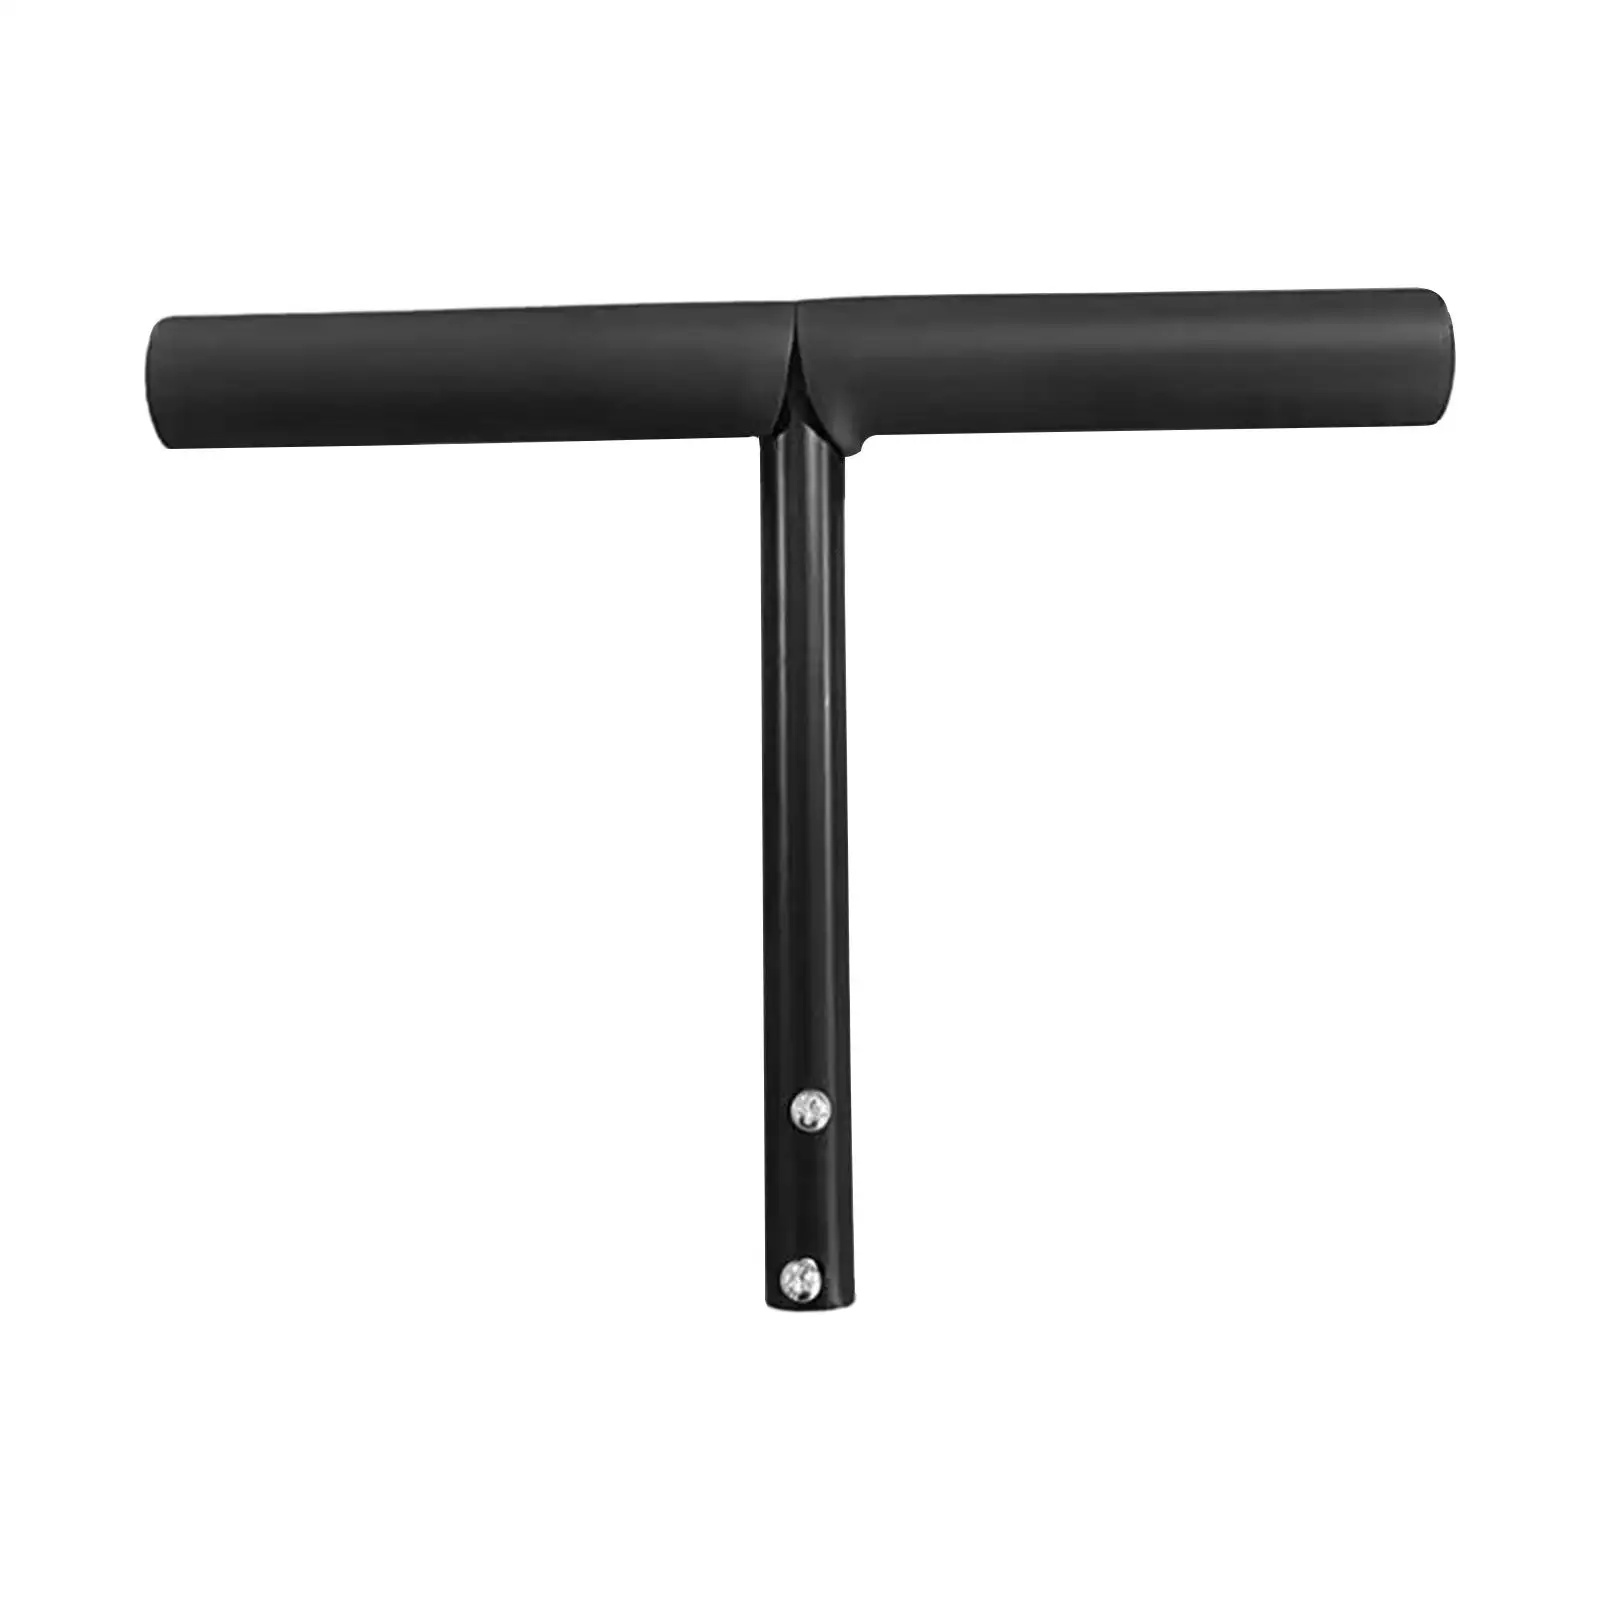 T Shaped Push Handle Bar Practical Sturdy Durable for Home Outdoor Travel